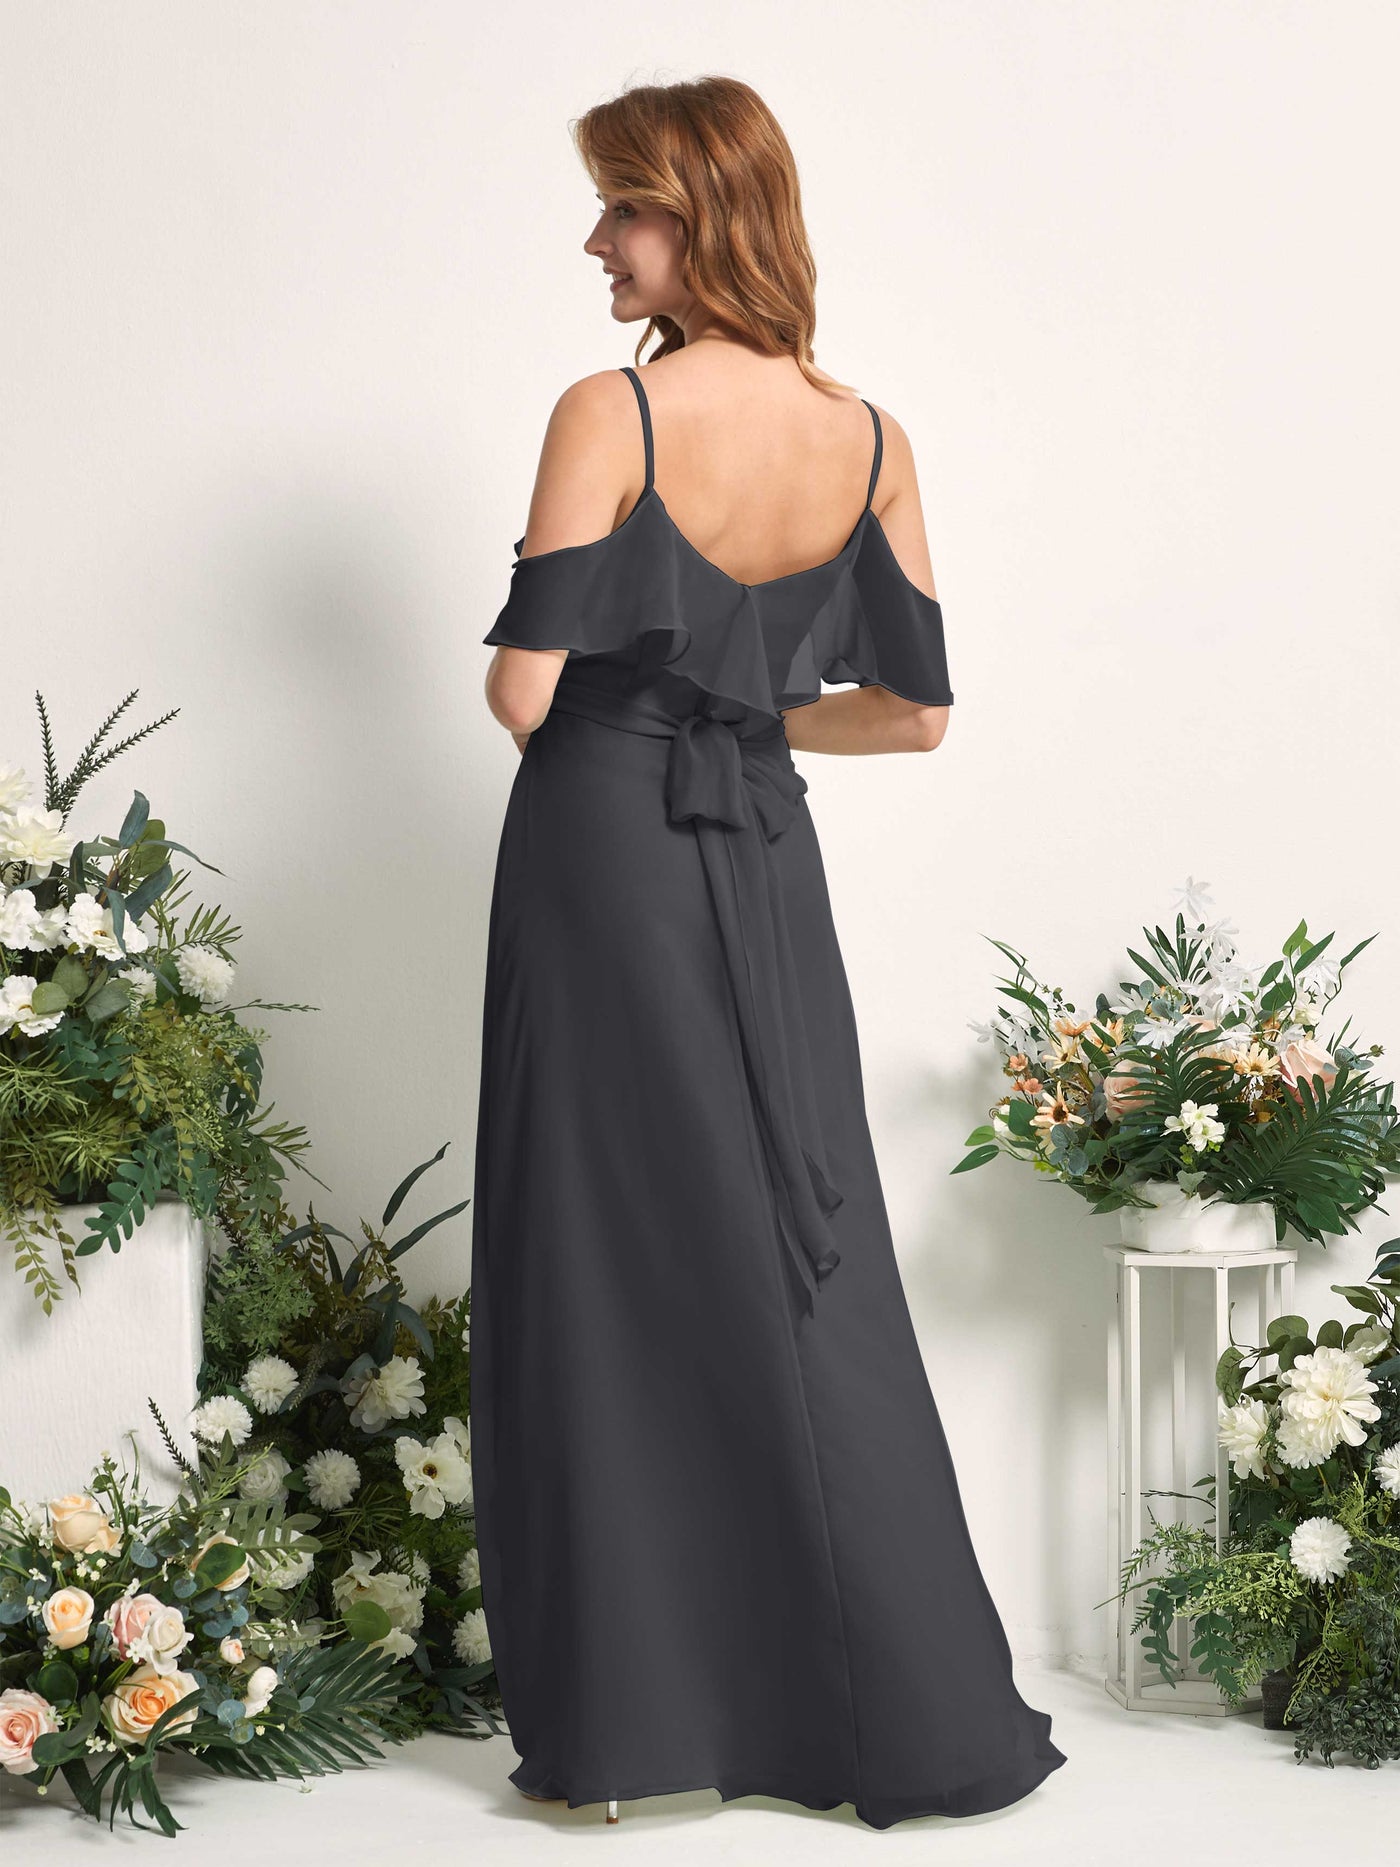 Bridesmaid Dress A-line Chiffon Spaghetti-straps Full Length Sleeveless Wedding Party Dress - Pewter (81227438)#color_pewter